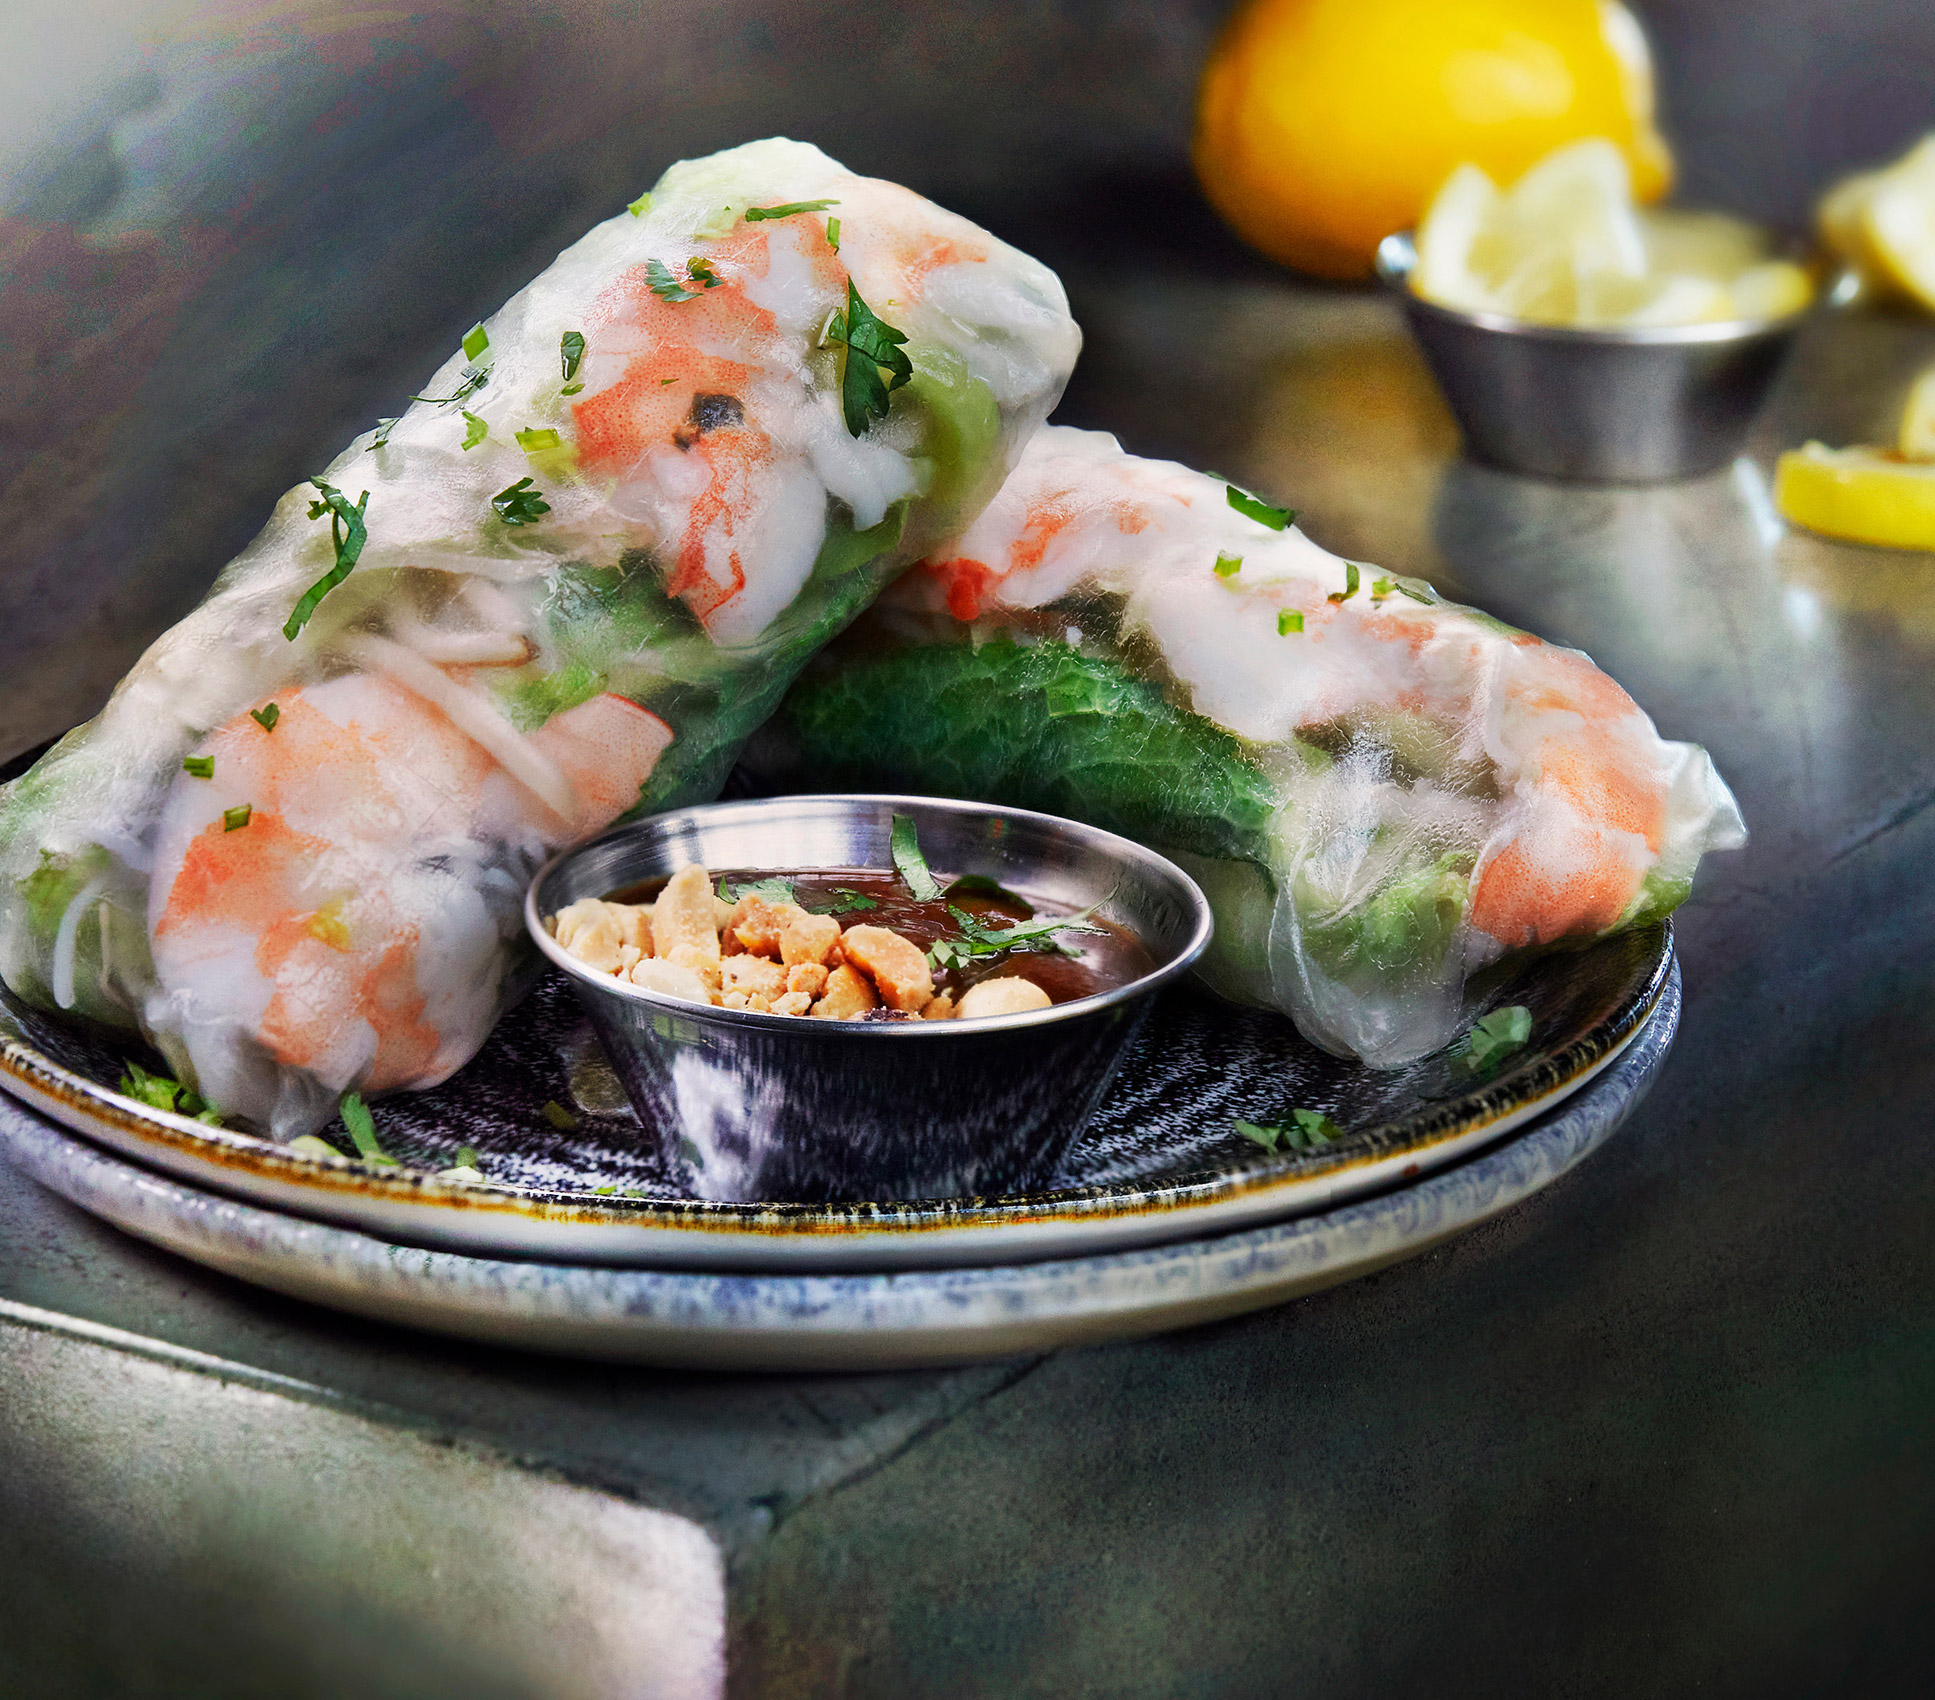 Summer Rolls with Peanut Dipping Sauce